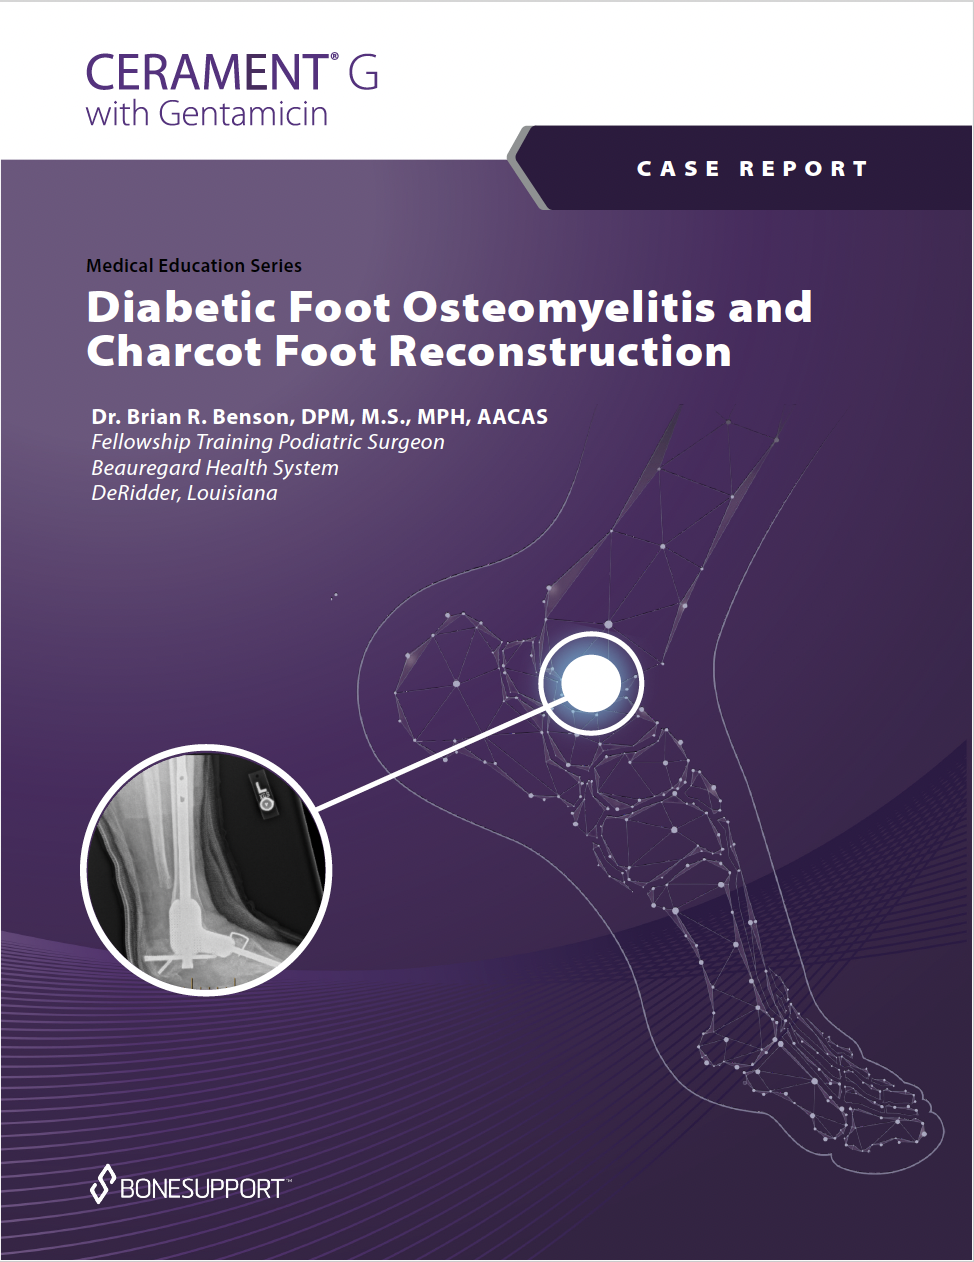 Diabetic Foot Osteomyelitis and Charcot Foot Reconstruction